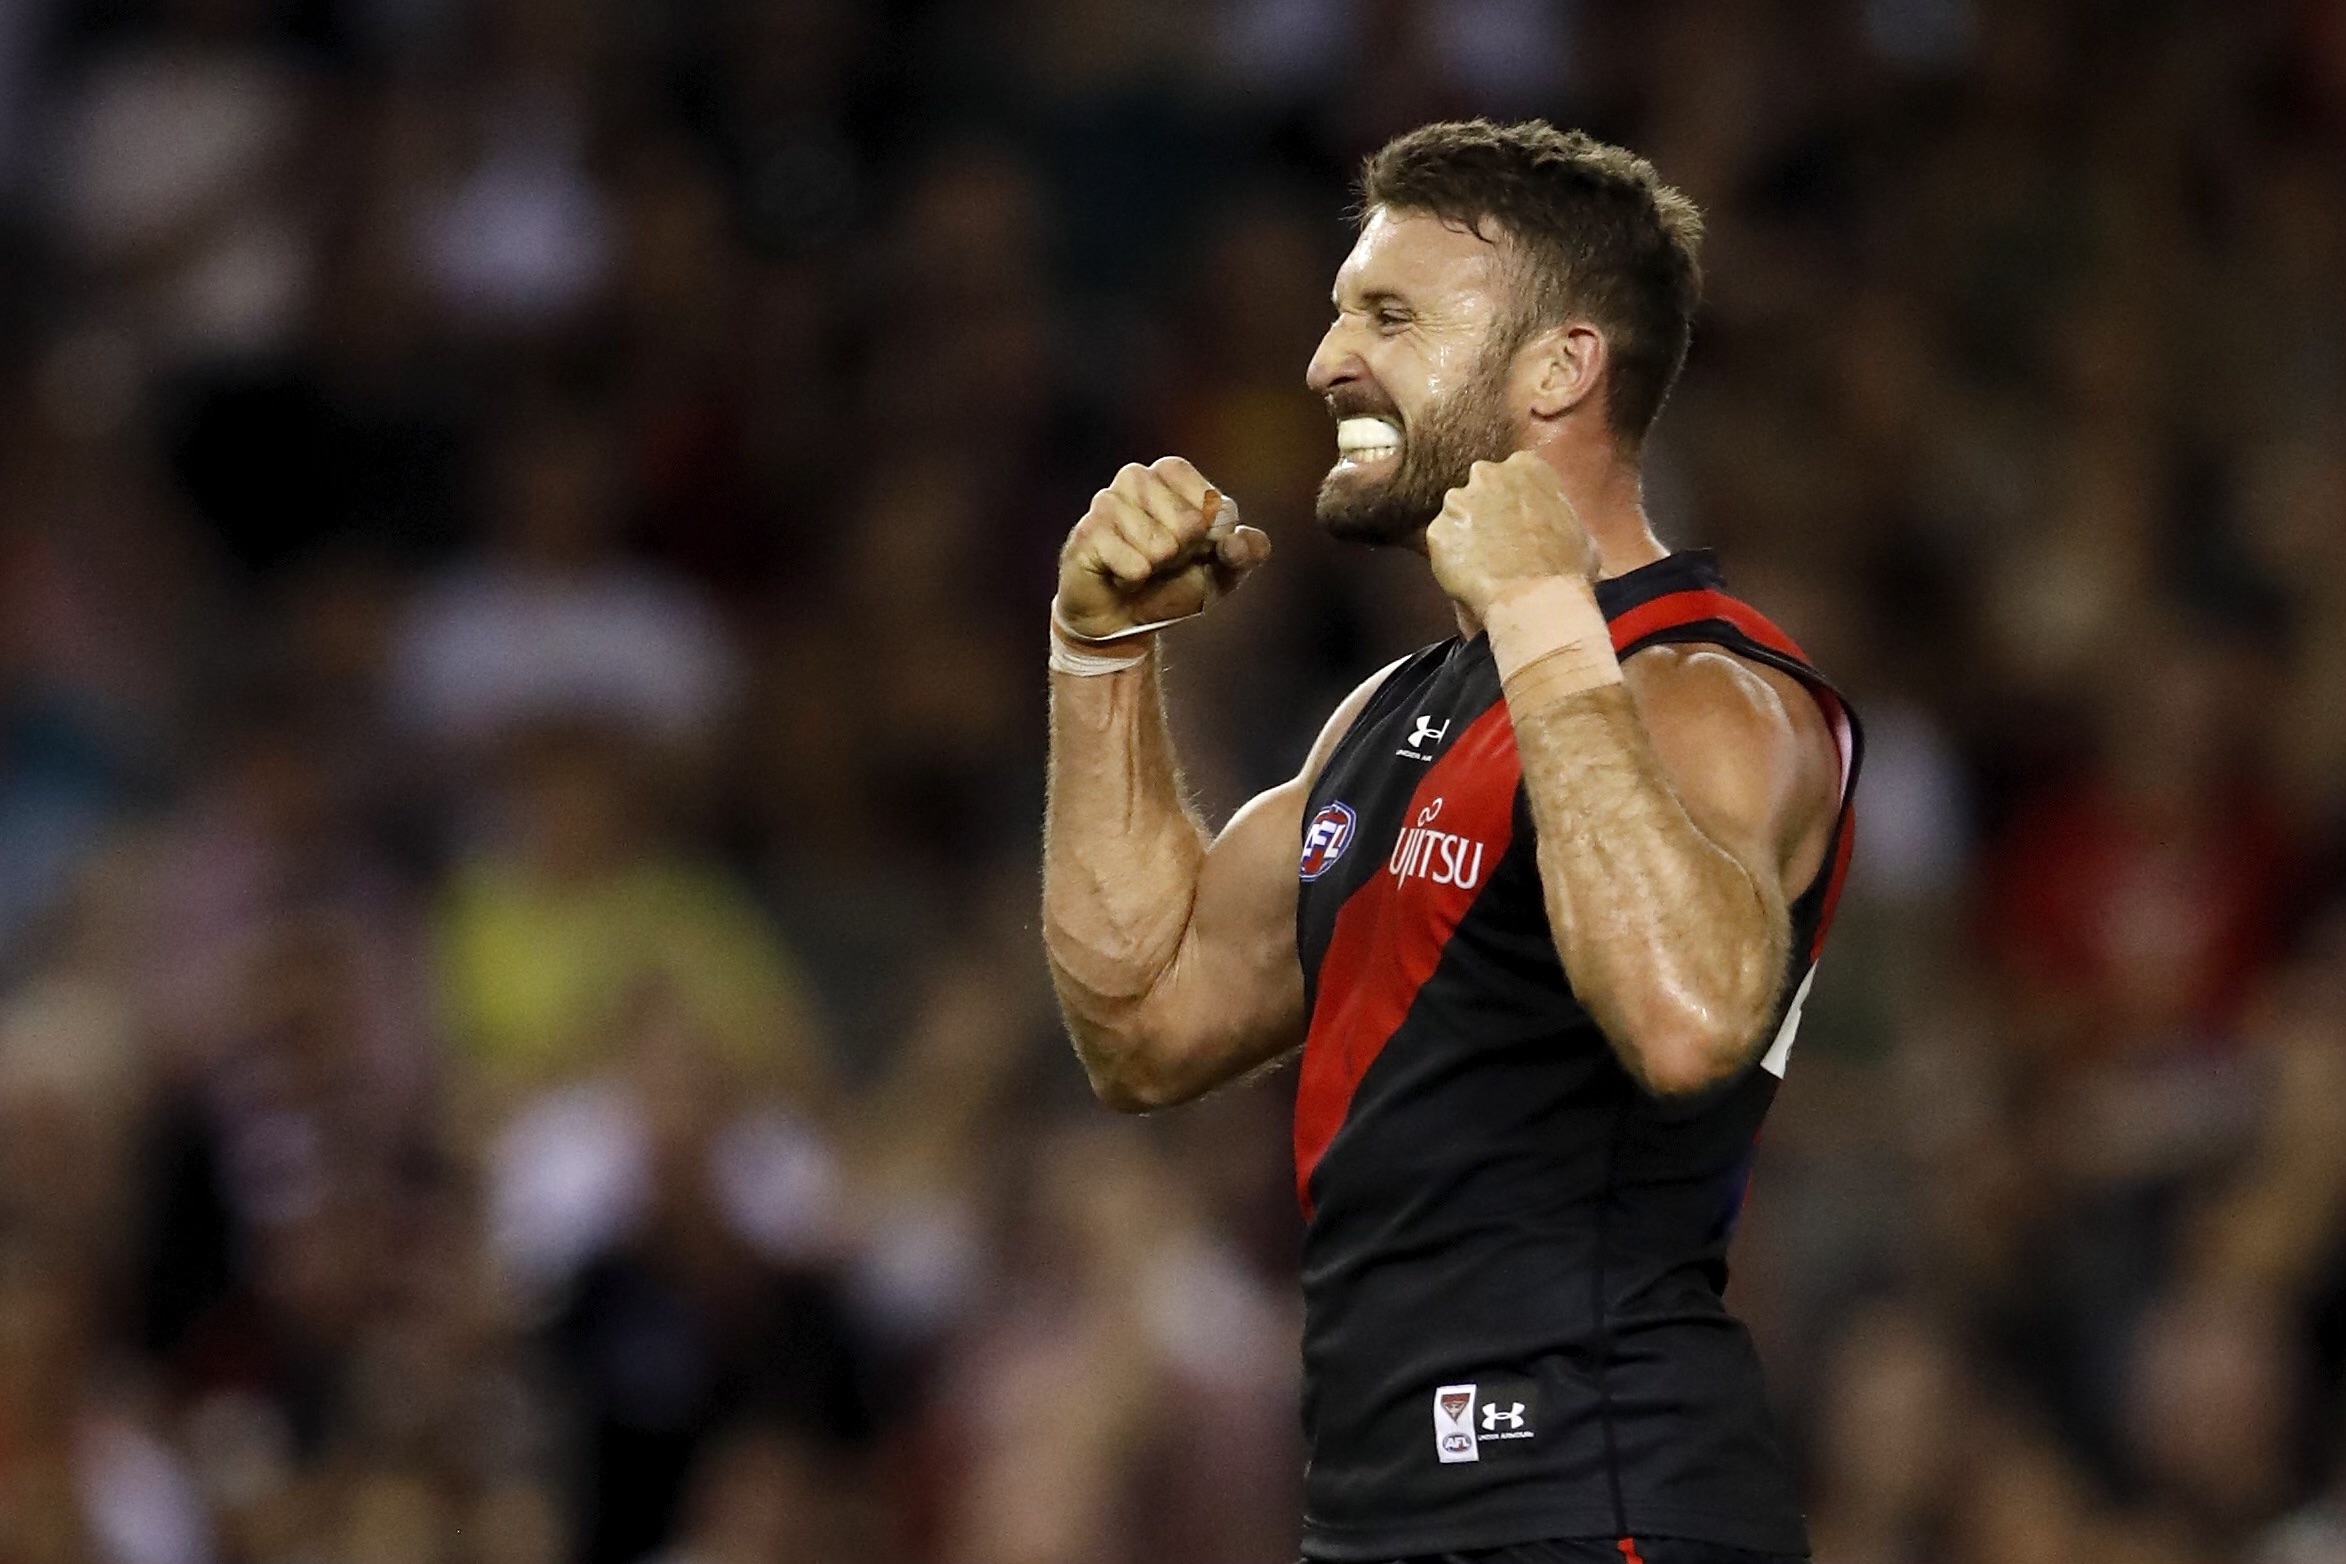 Cale Hooker from Essendon, who is one of the biggest goal kickers this year. 